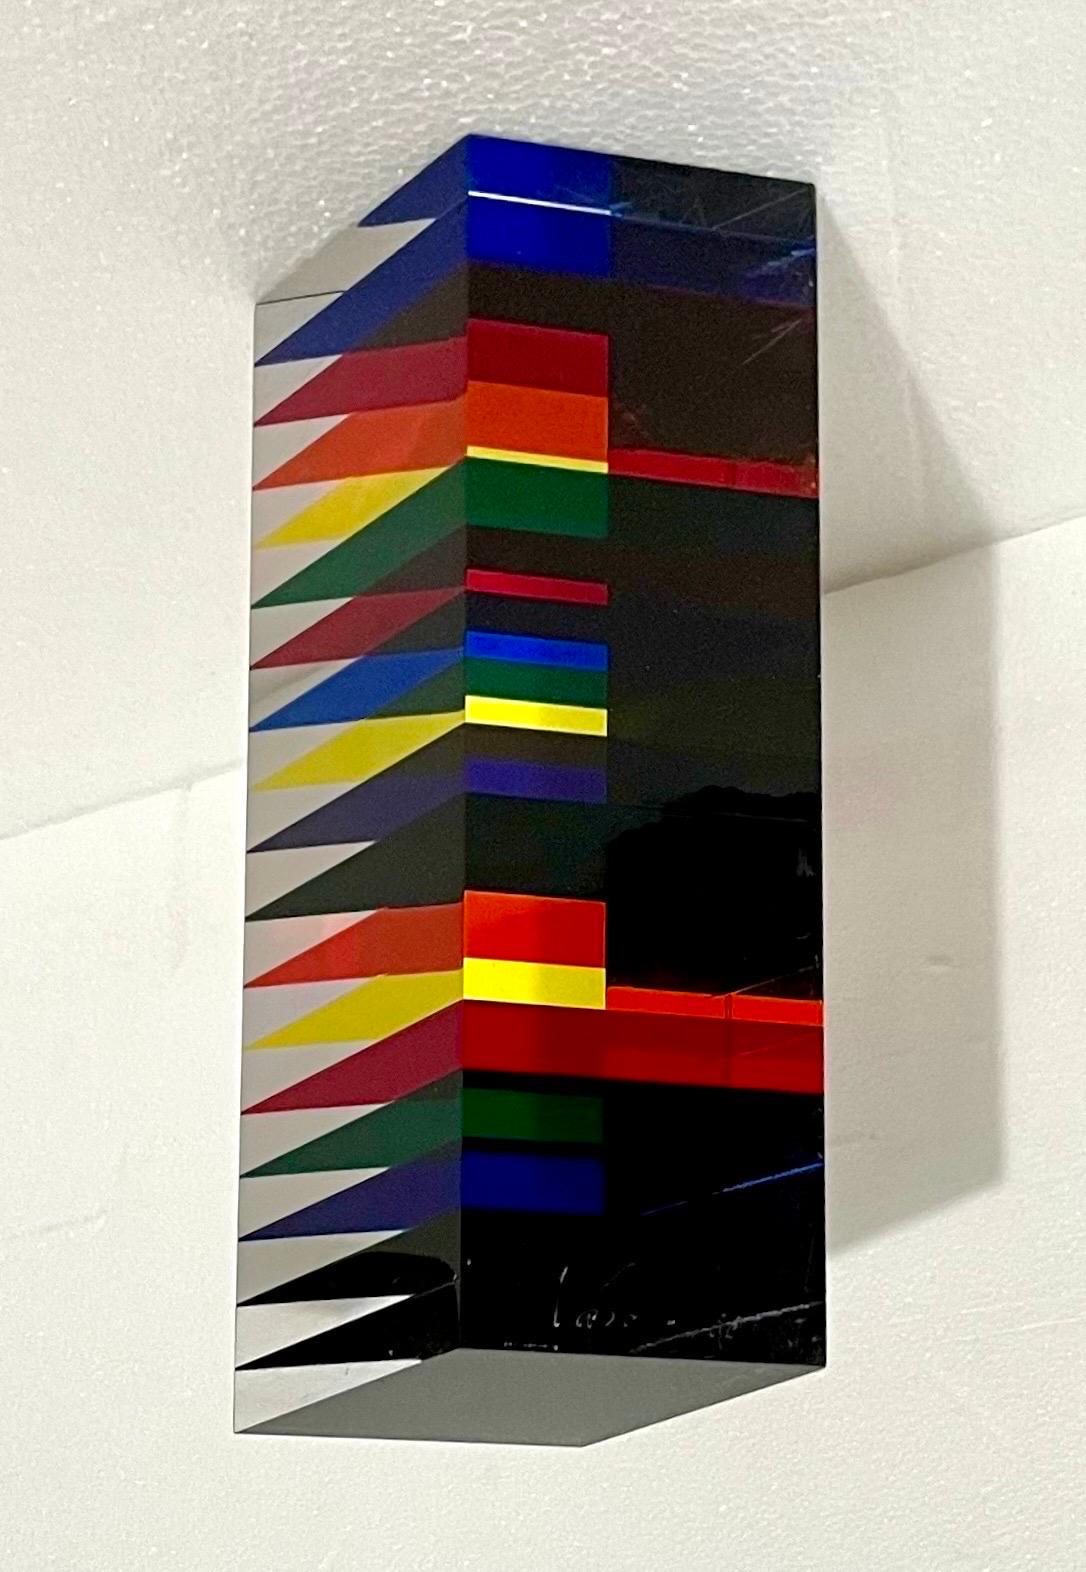 Vasa Velizar Mihich Abstract Sculpture - Hand Signed Dated 2001 Colorful Acrylic Vasa Laminated Lucite Triangle Sculpture